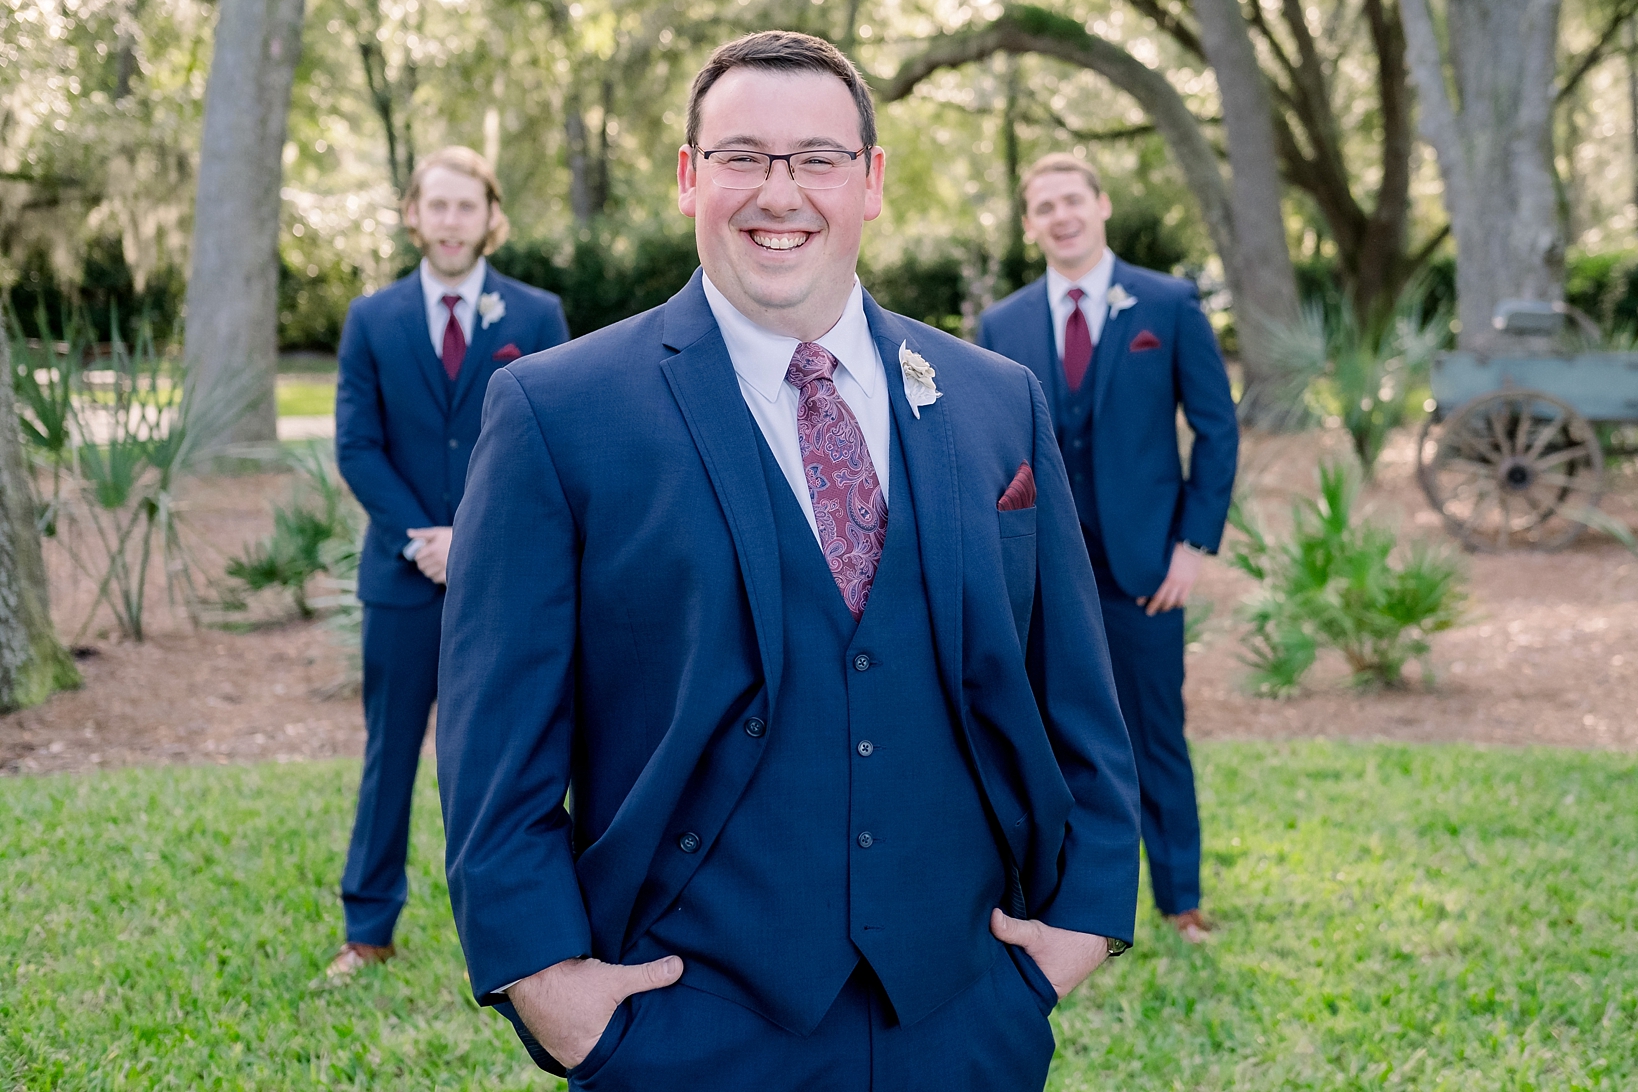 Groom smiling at the camera in a Navy Suit with red pocket square